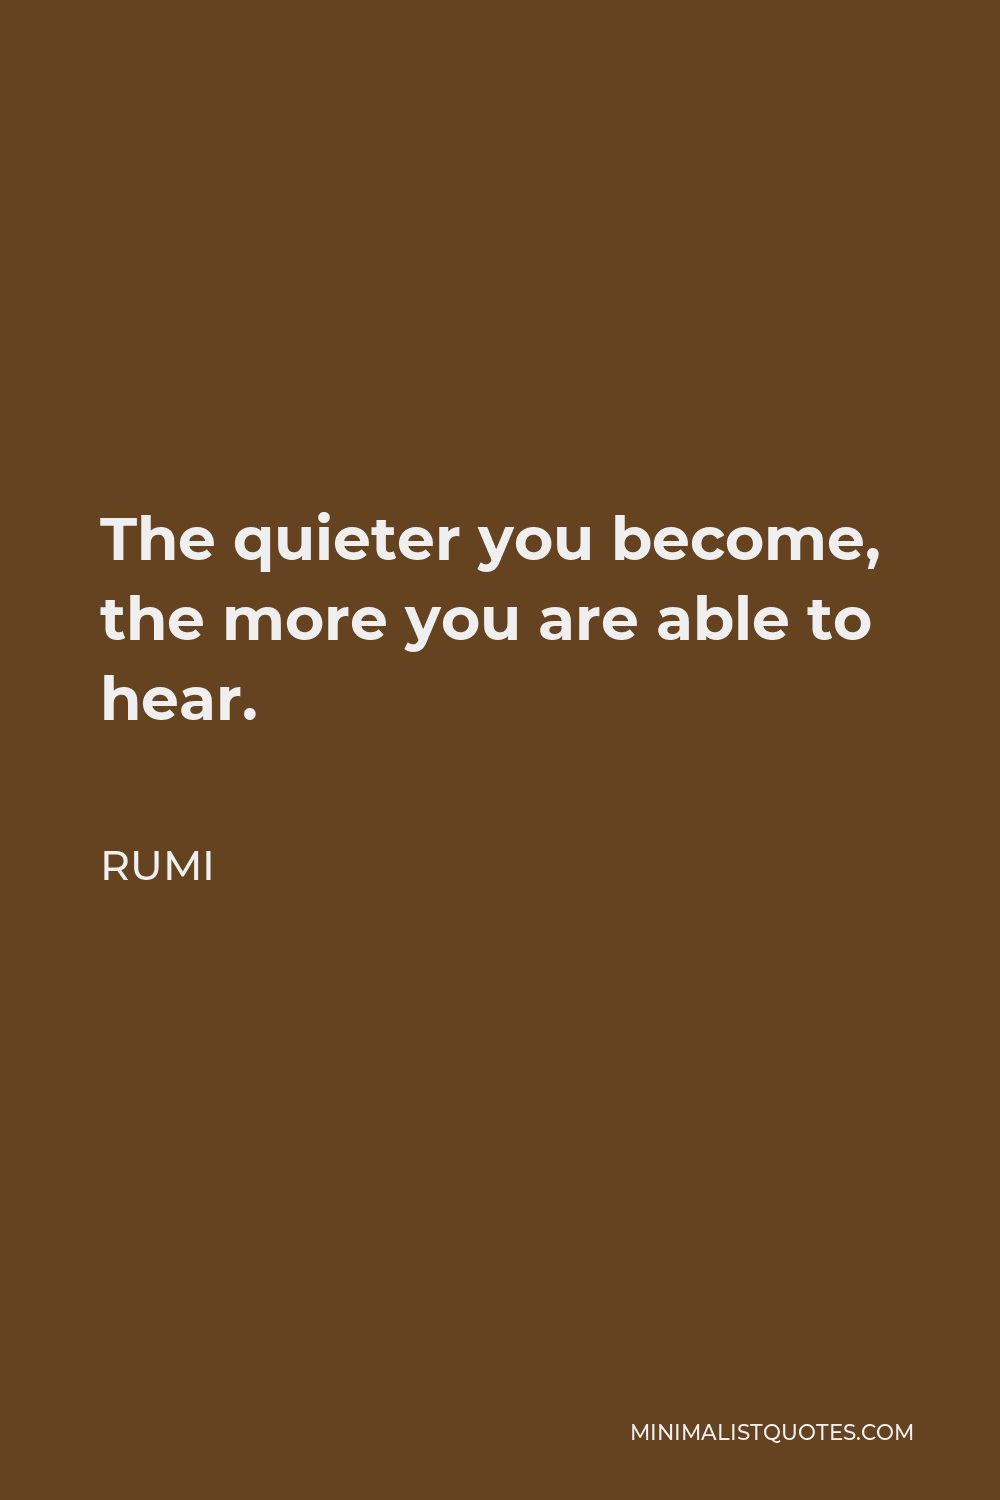 Rumi Quote - The quieter you become, the more you are able to hear.